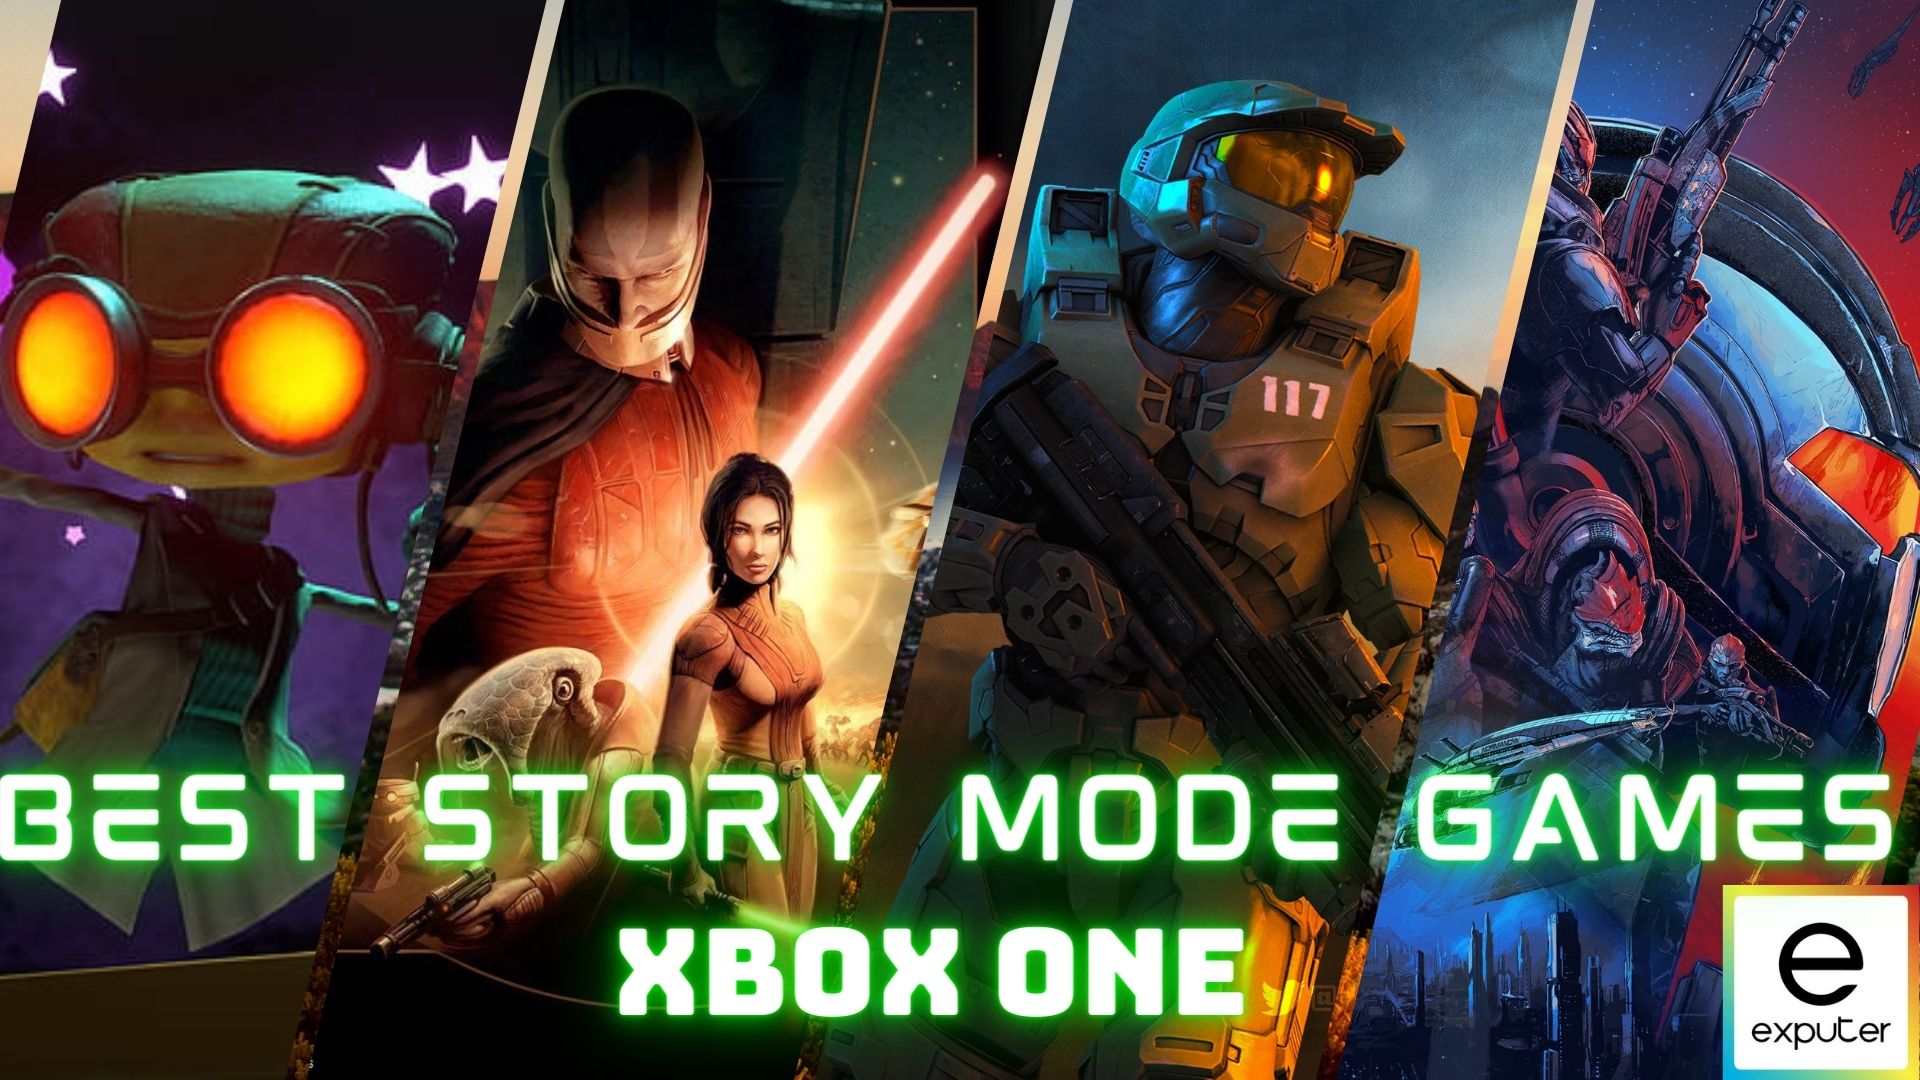 plank Geelachtig Stadion 60 BEST Story Mode Games On Xbox One & Series X - eXputer.com